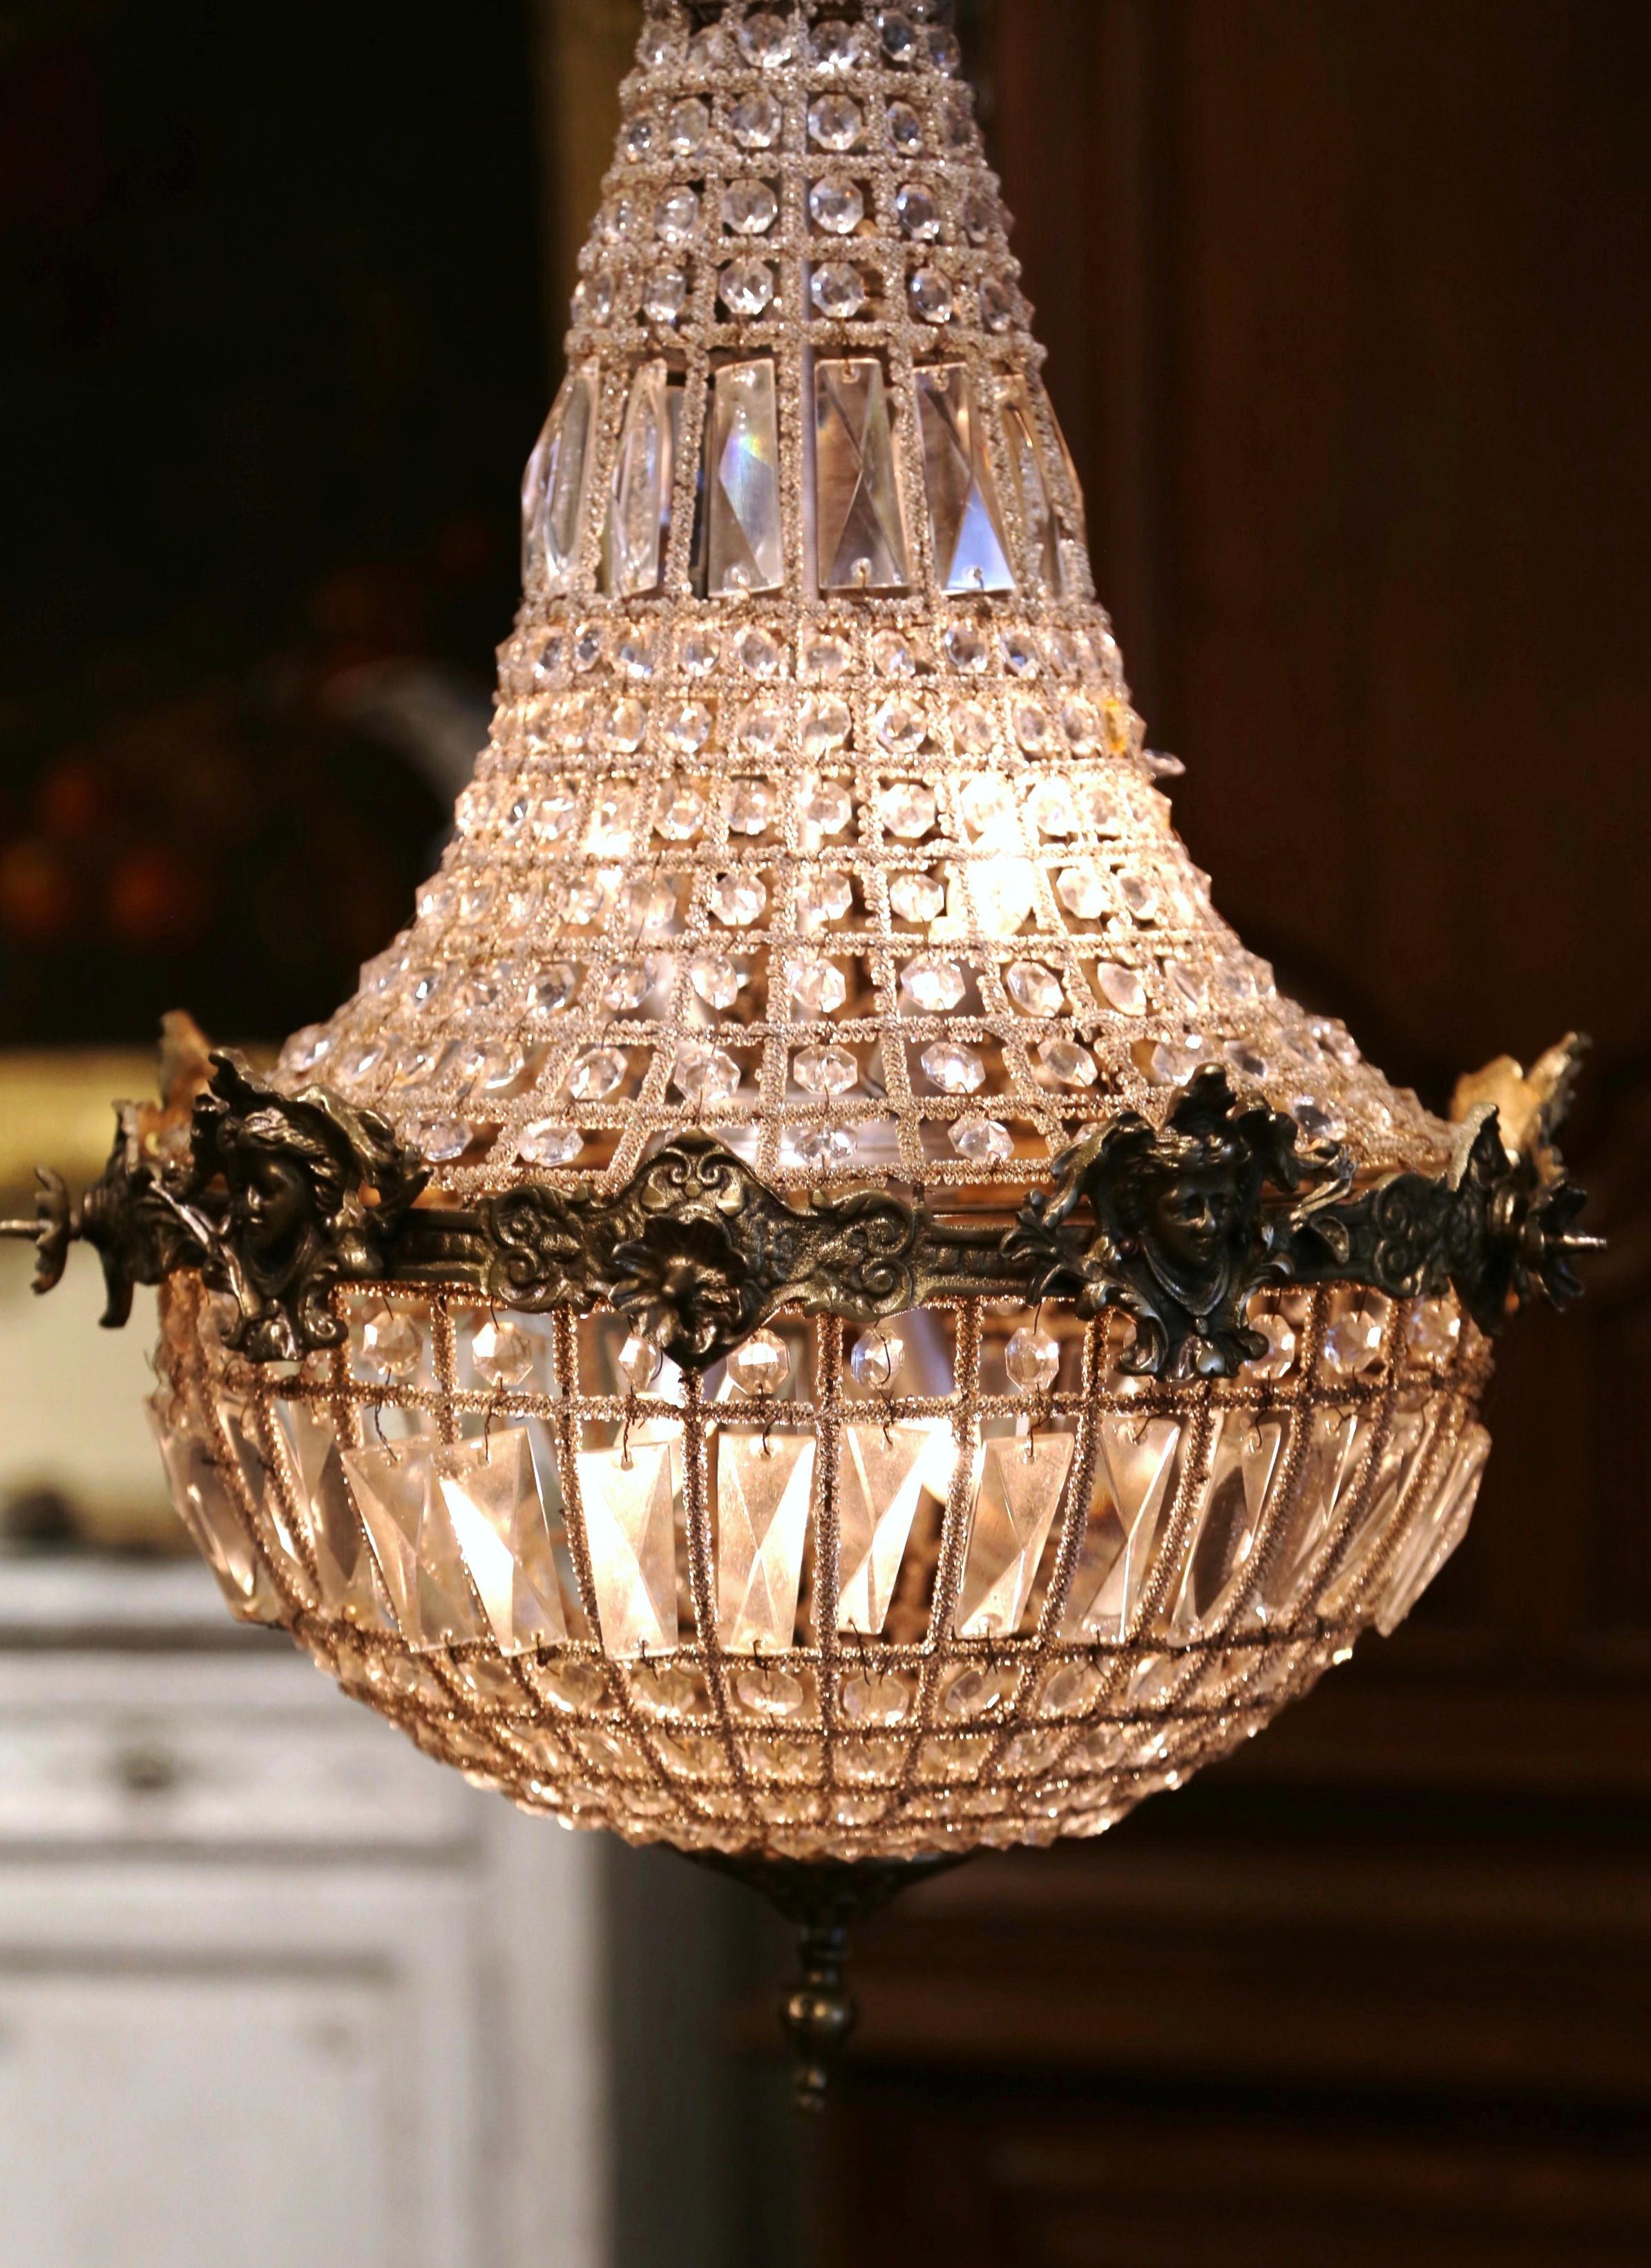 Hand-Crafted Mid-20th Century French Crystal and Bronze Four-Light Basket Chandelier